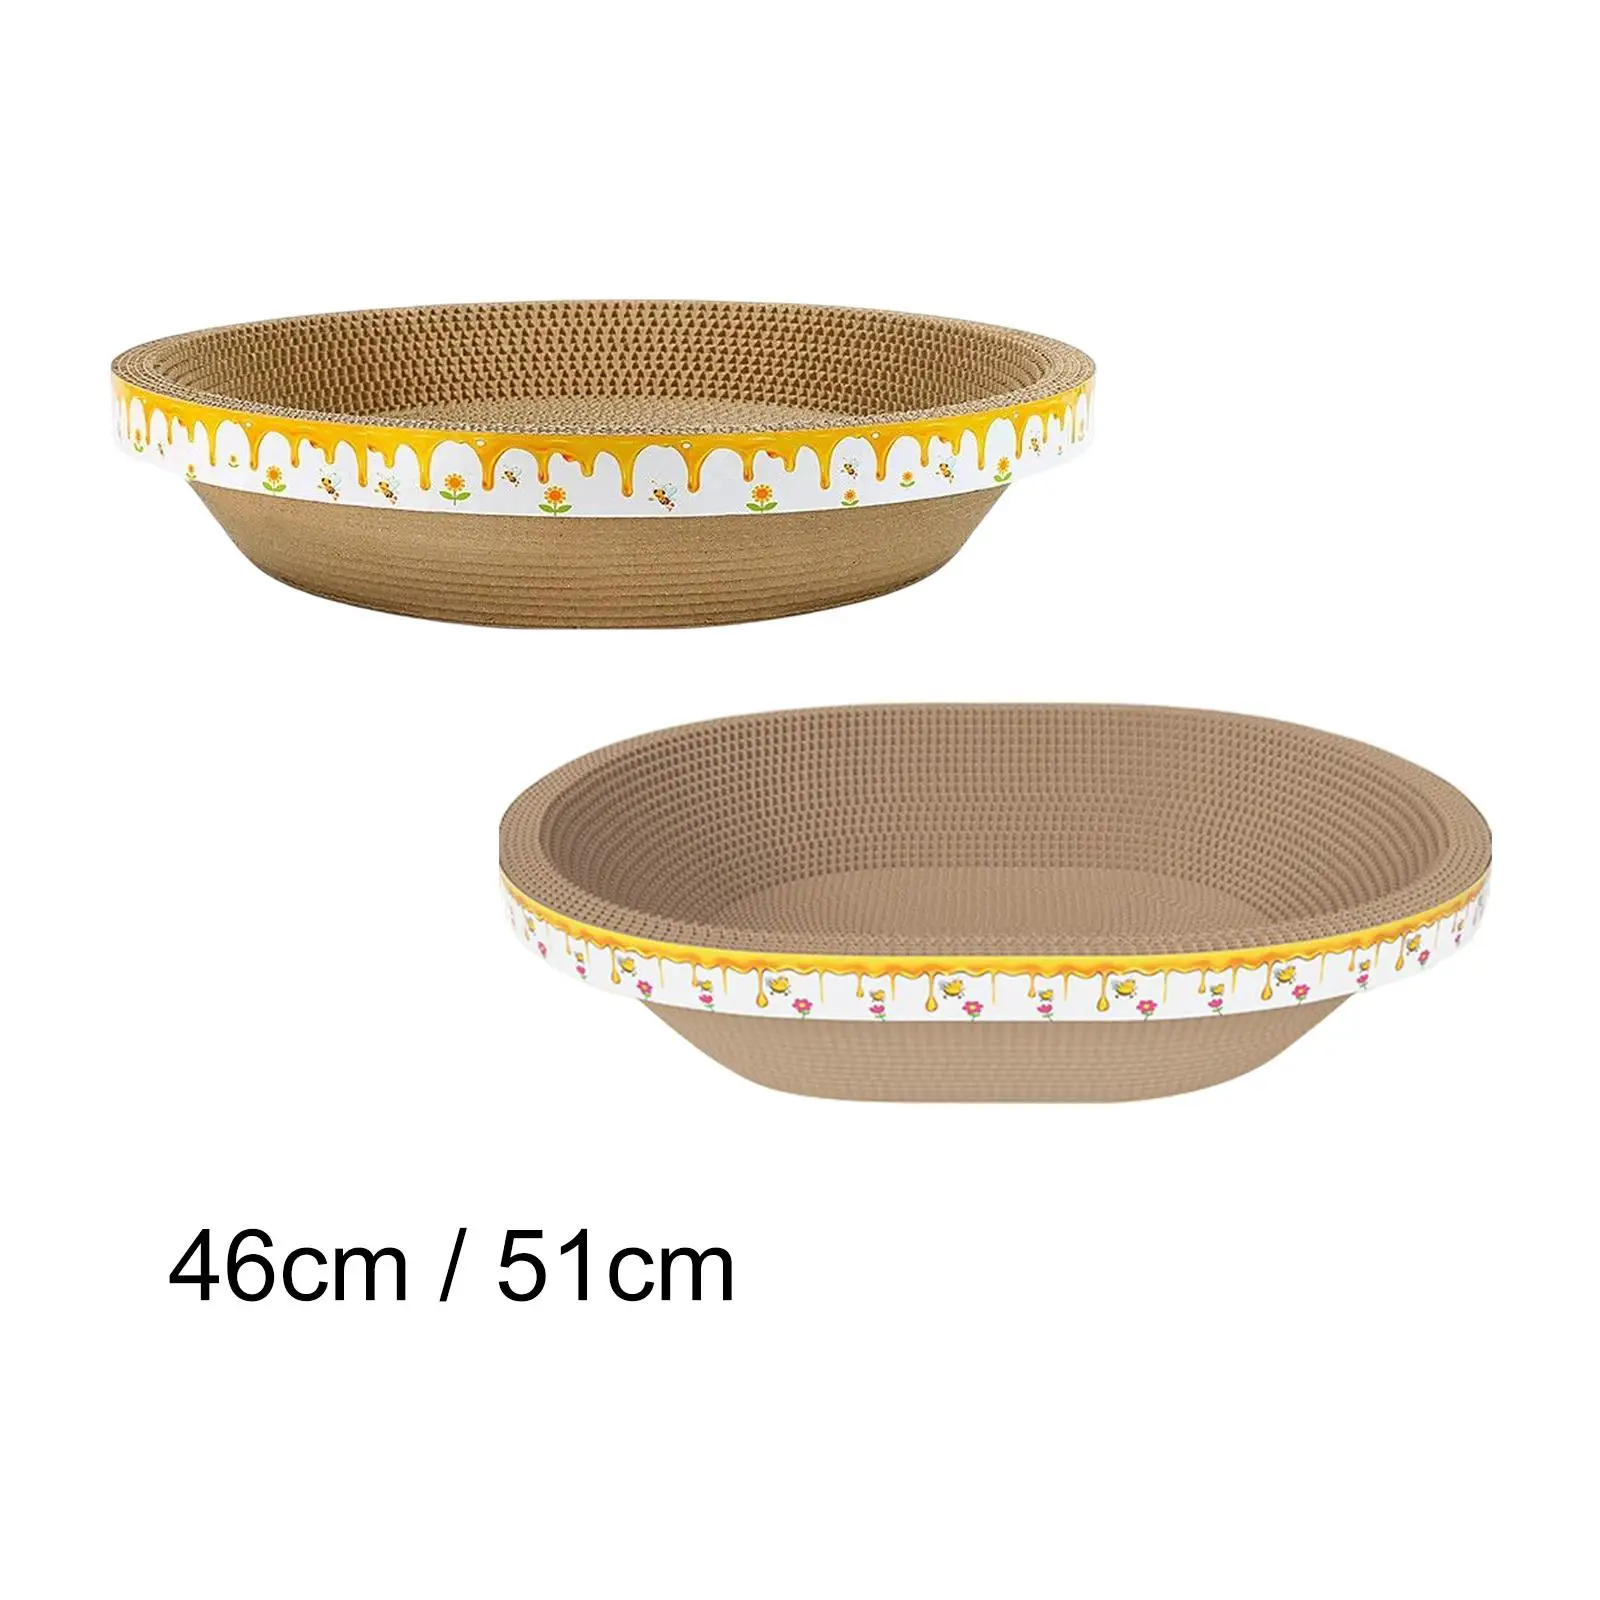 Bowl Shaped Cat Scratcher Sleeping Board Ornament Activity Toys Furniture Protection Scratching Pad for Indoor Cats Bedroom Yard